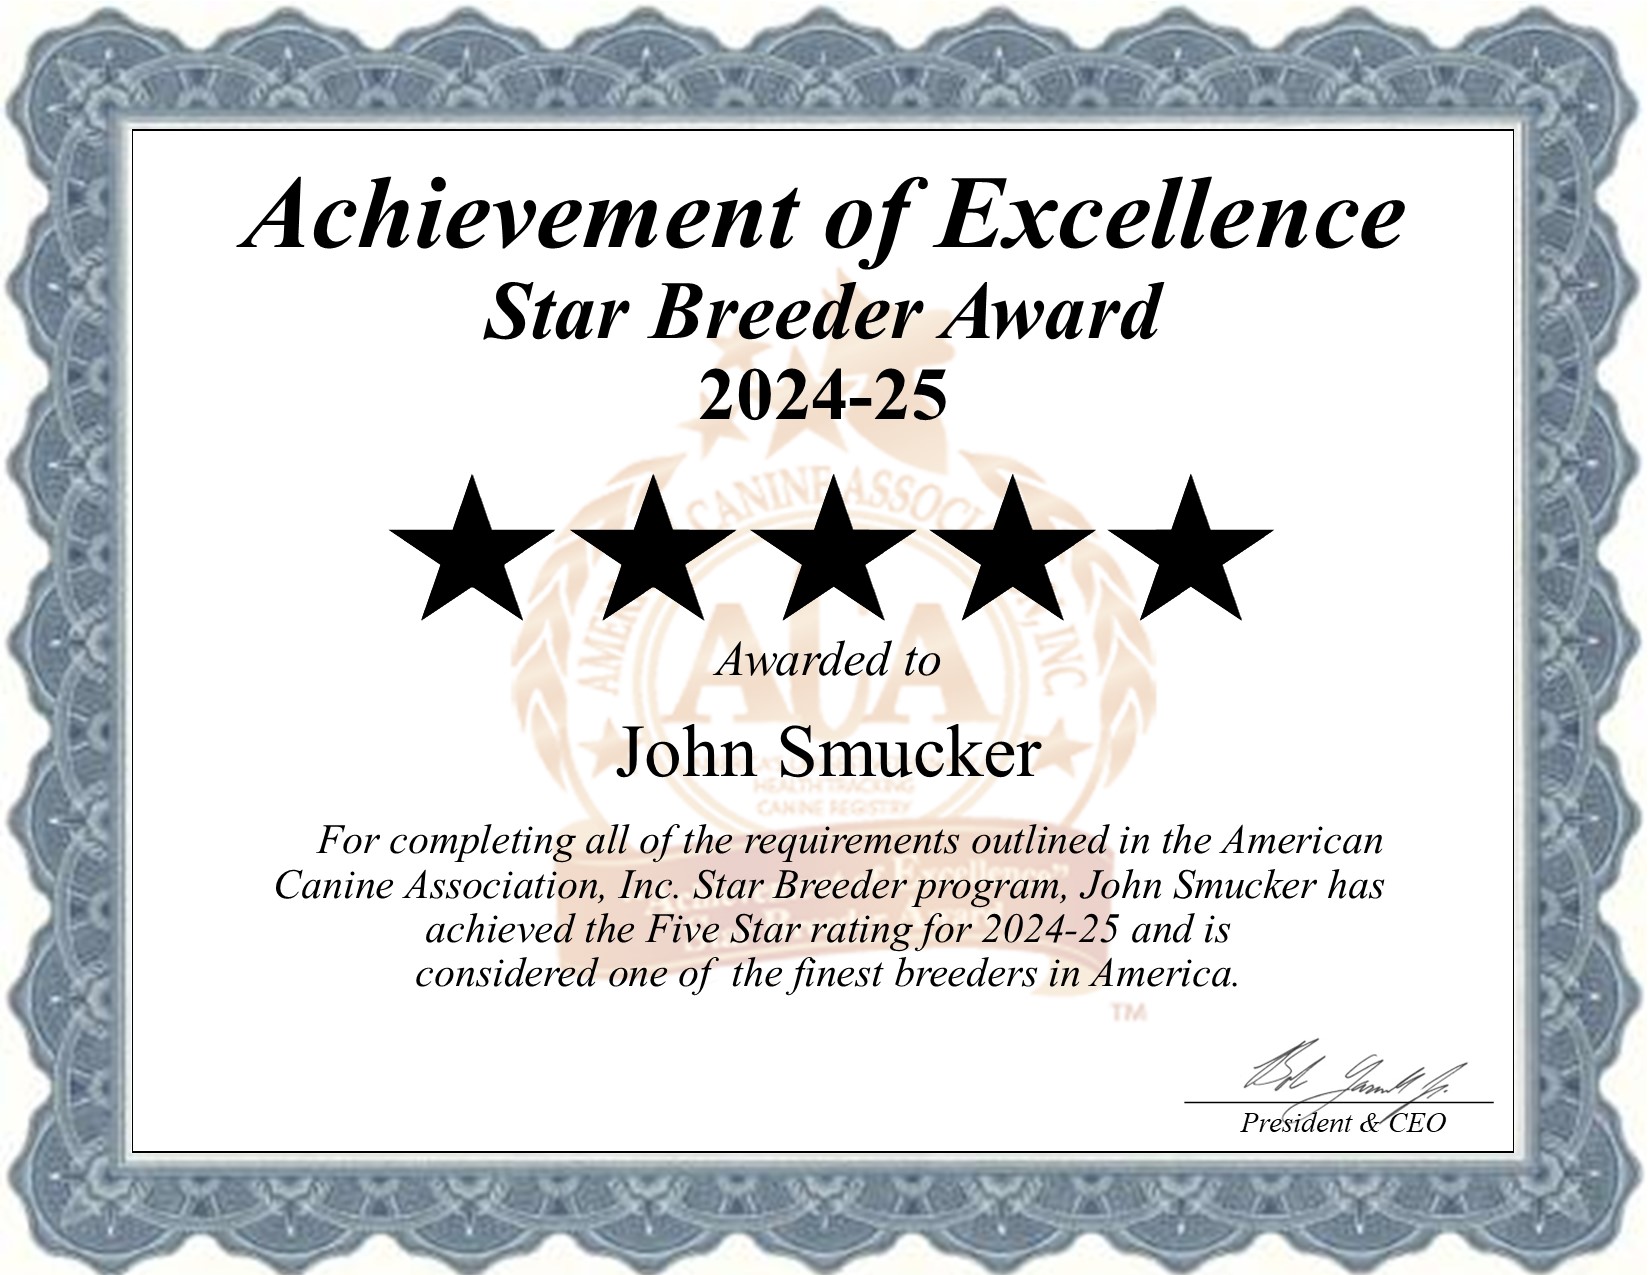 John, Smucker, dog, breeder, star, certificate, John-Smucker, East Earl, PA, Pennsylvania, puppy, dog, kennels, mill, puppymill, usda, 5-star, aca, ica, registered, Toy Poodle, none